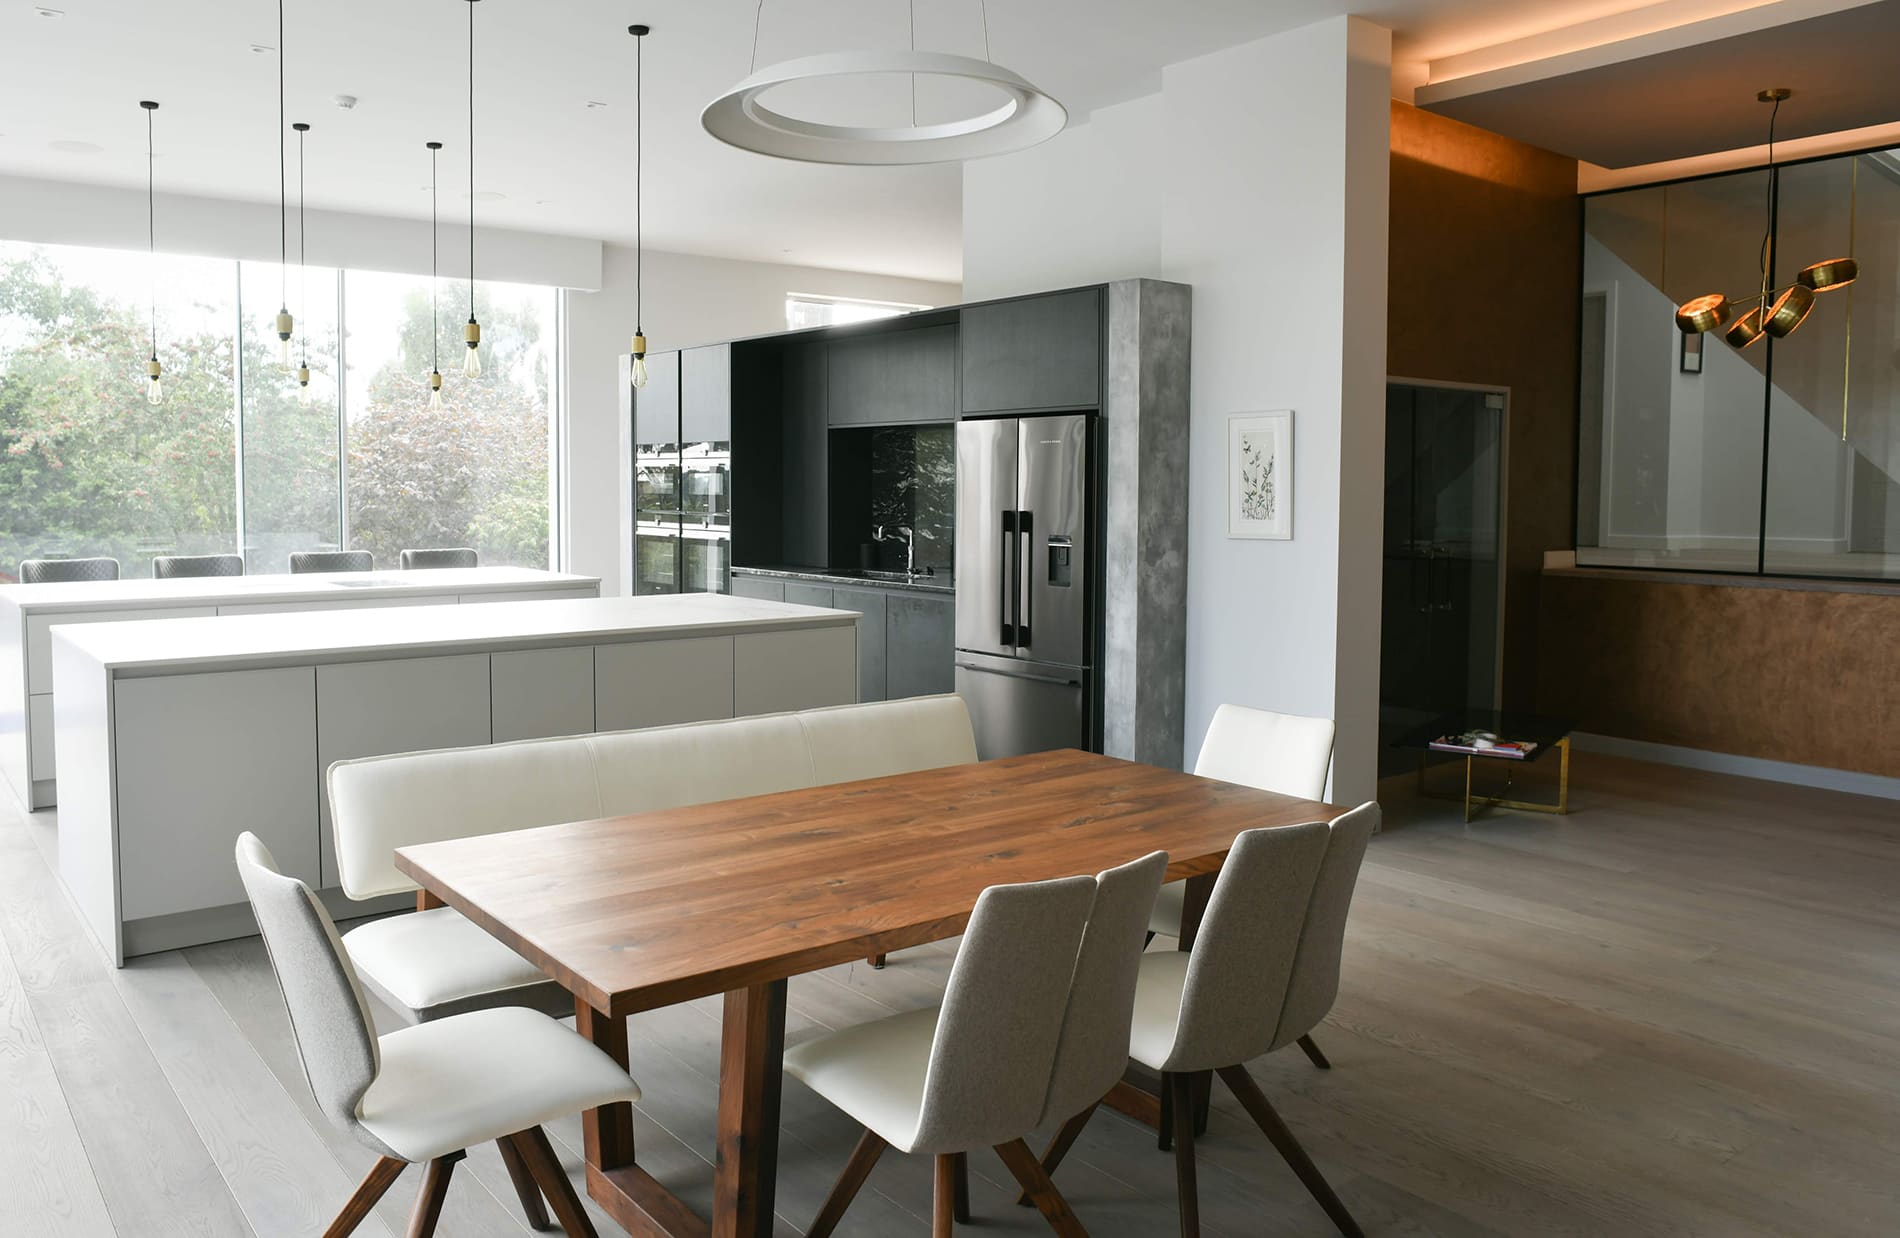 Getting the ‘wow’ factor in a light and large kitchen space 9